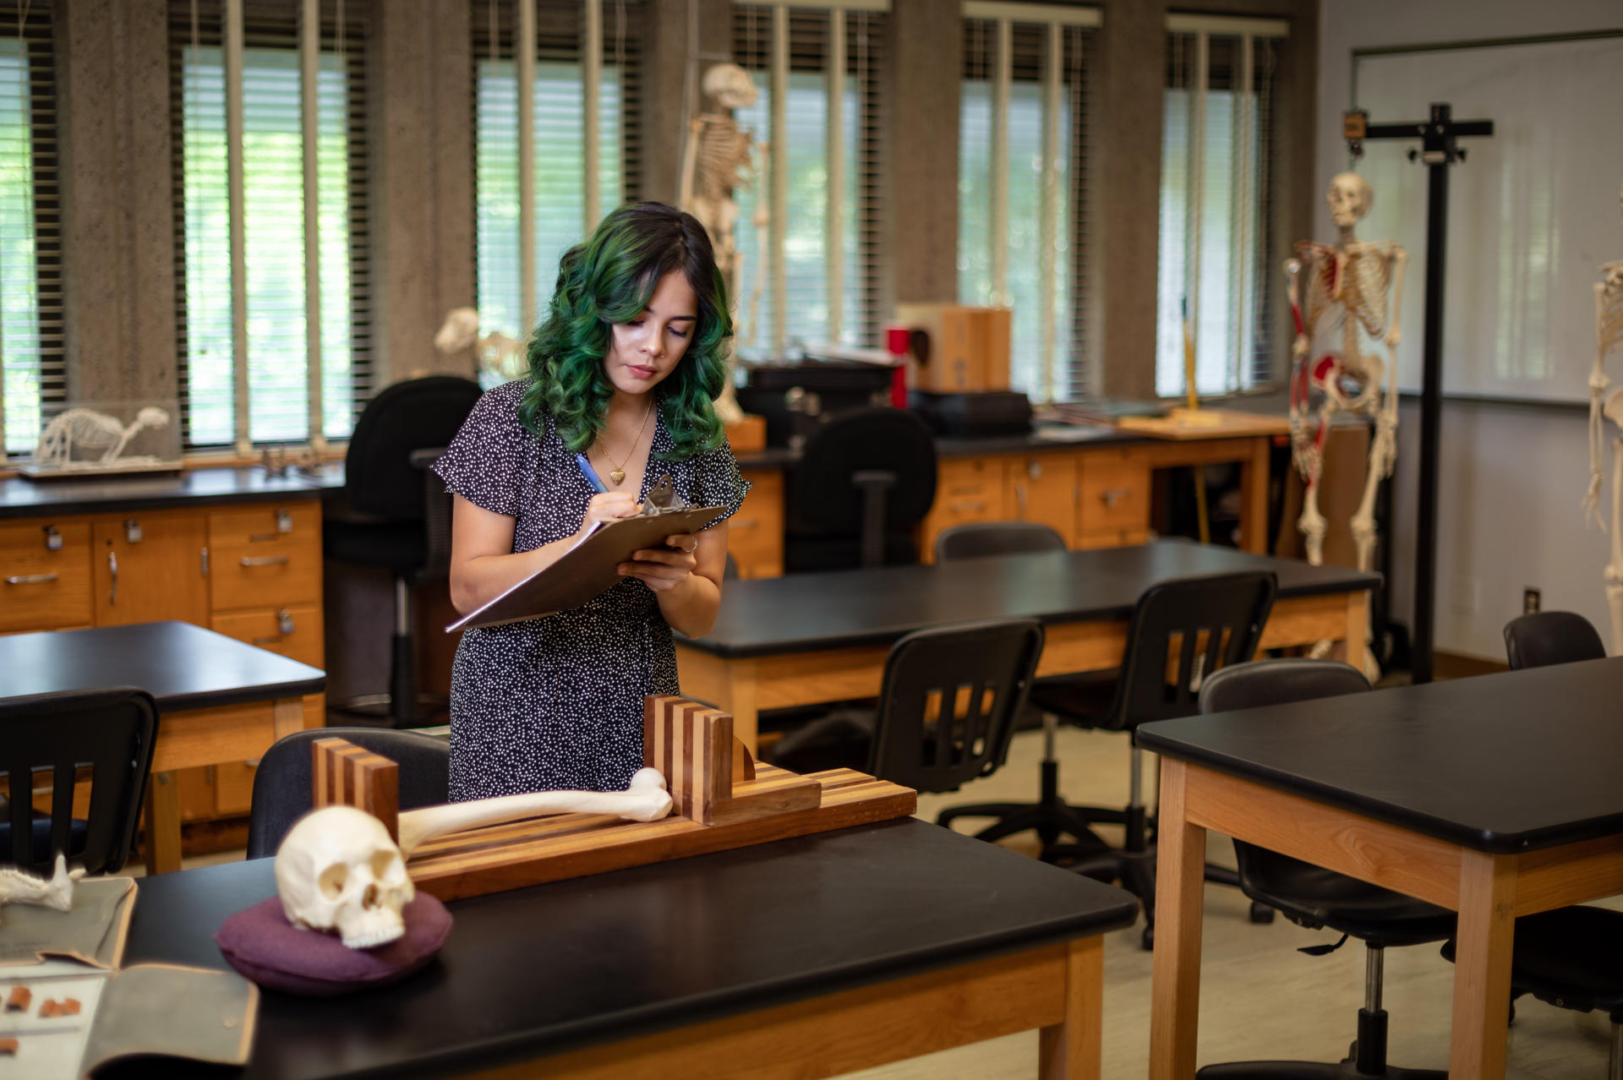 Daisy Linsangan writes on a clipboard near a table with model human remains.